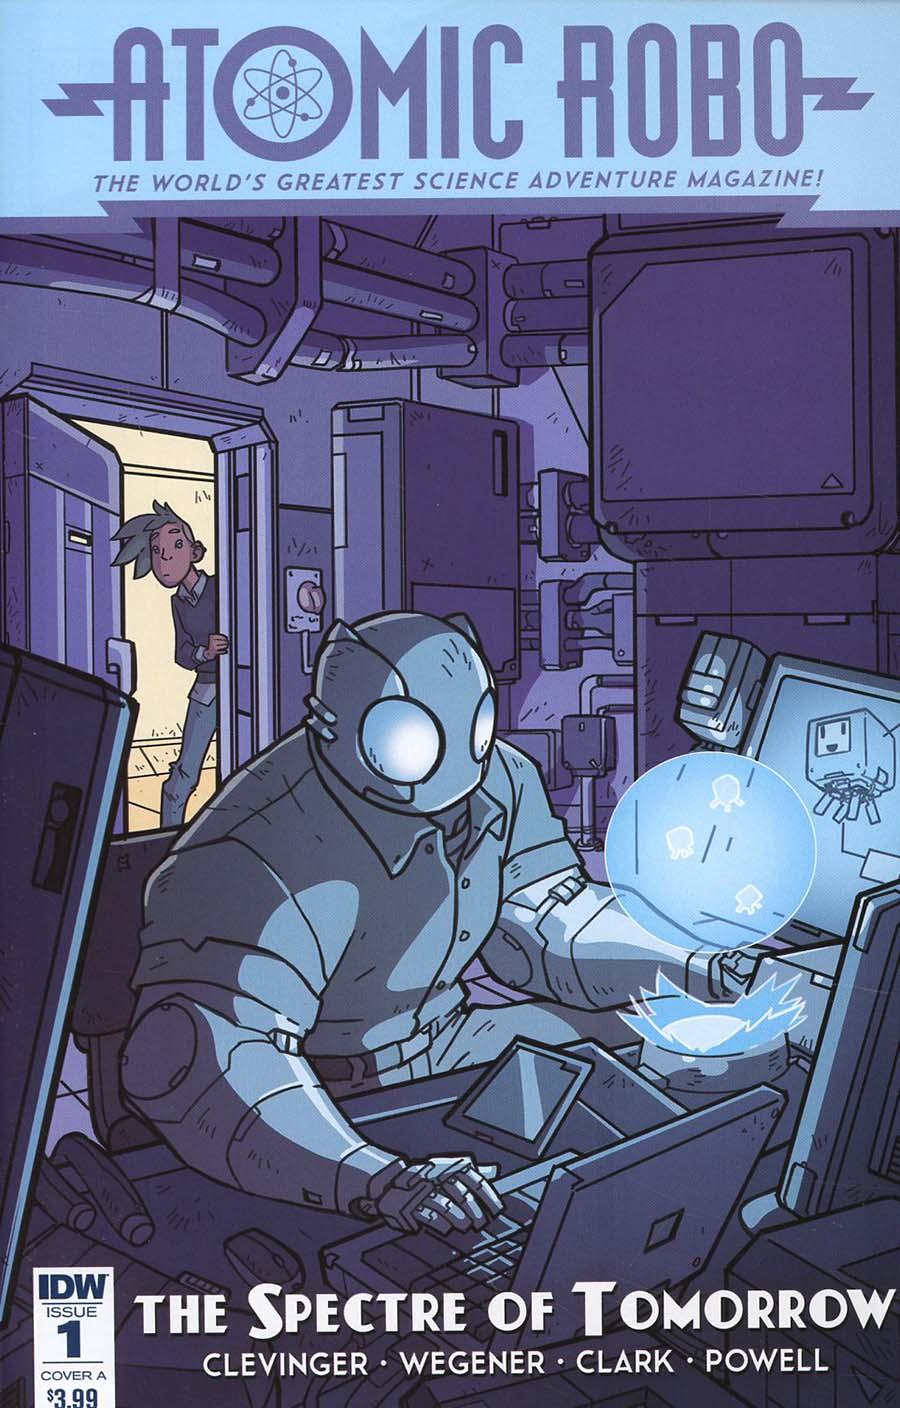 Atomic Robo And The Spectre Of Tomorrow Vol. 1 #1